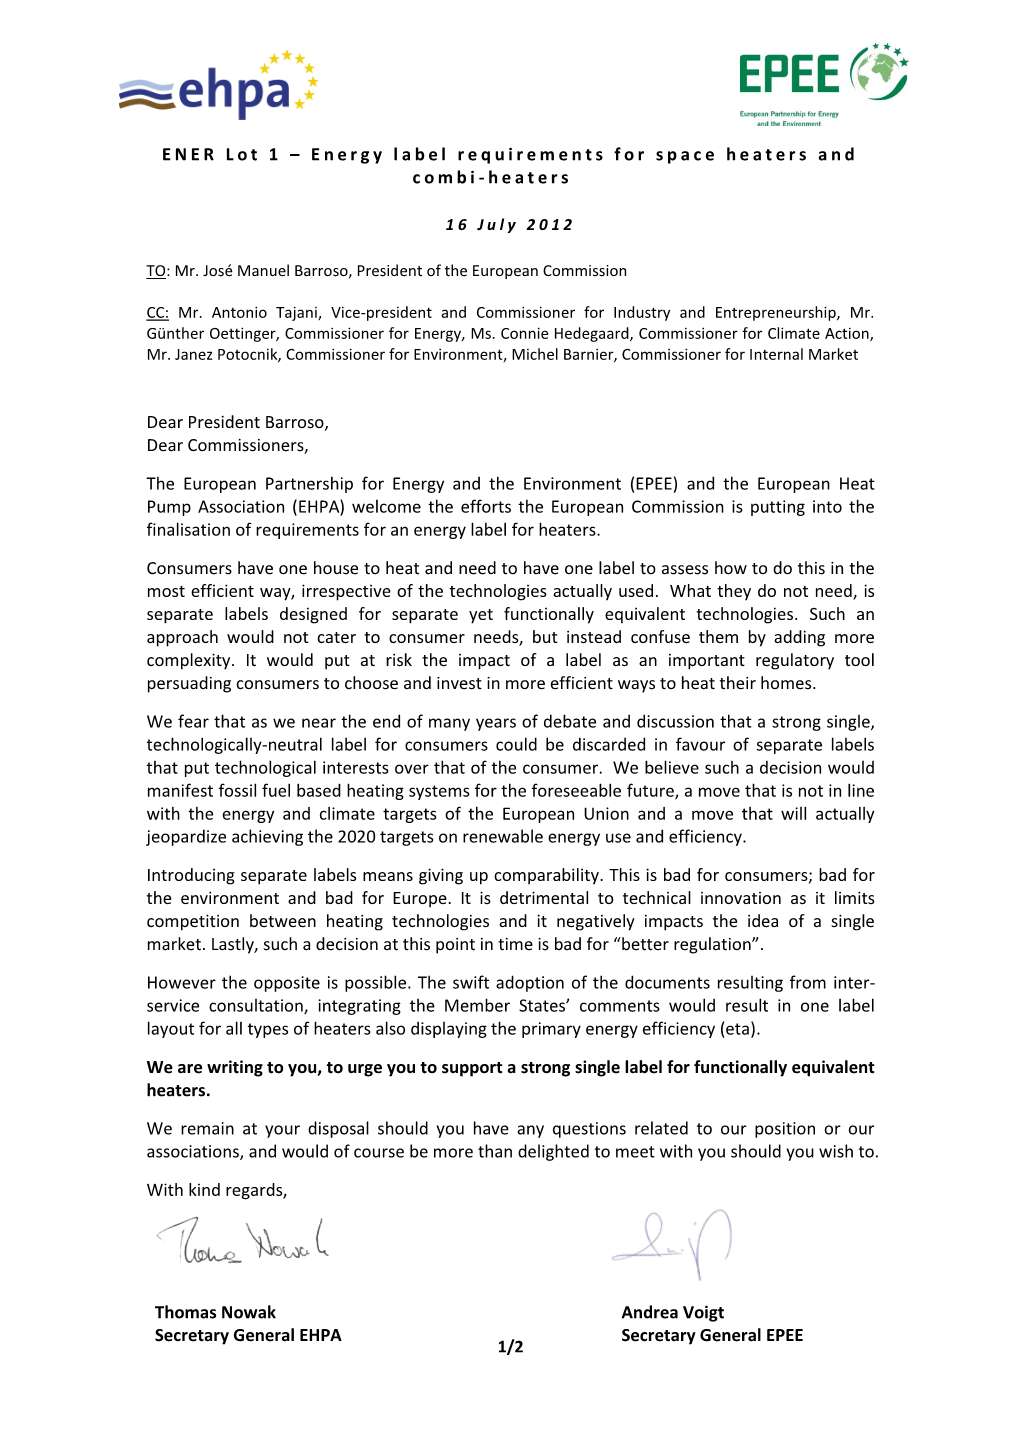 EHPA EPEE Official Letter to President Barroso on Energy Label For